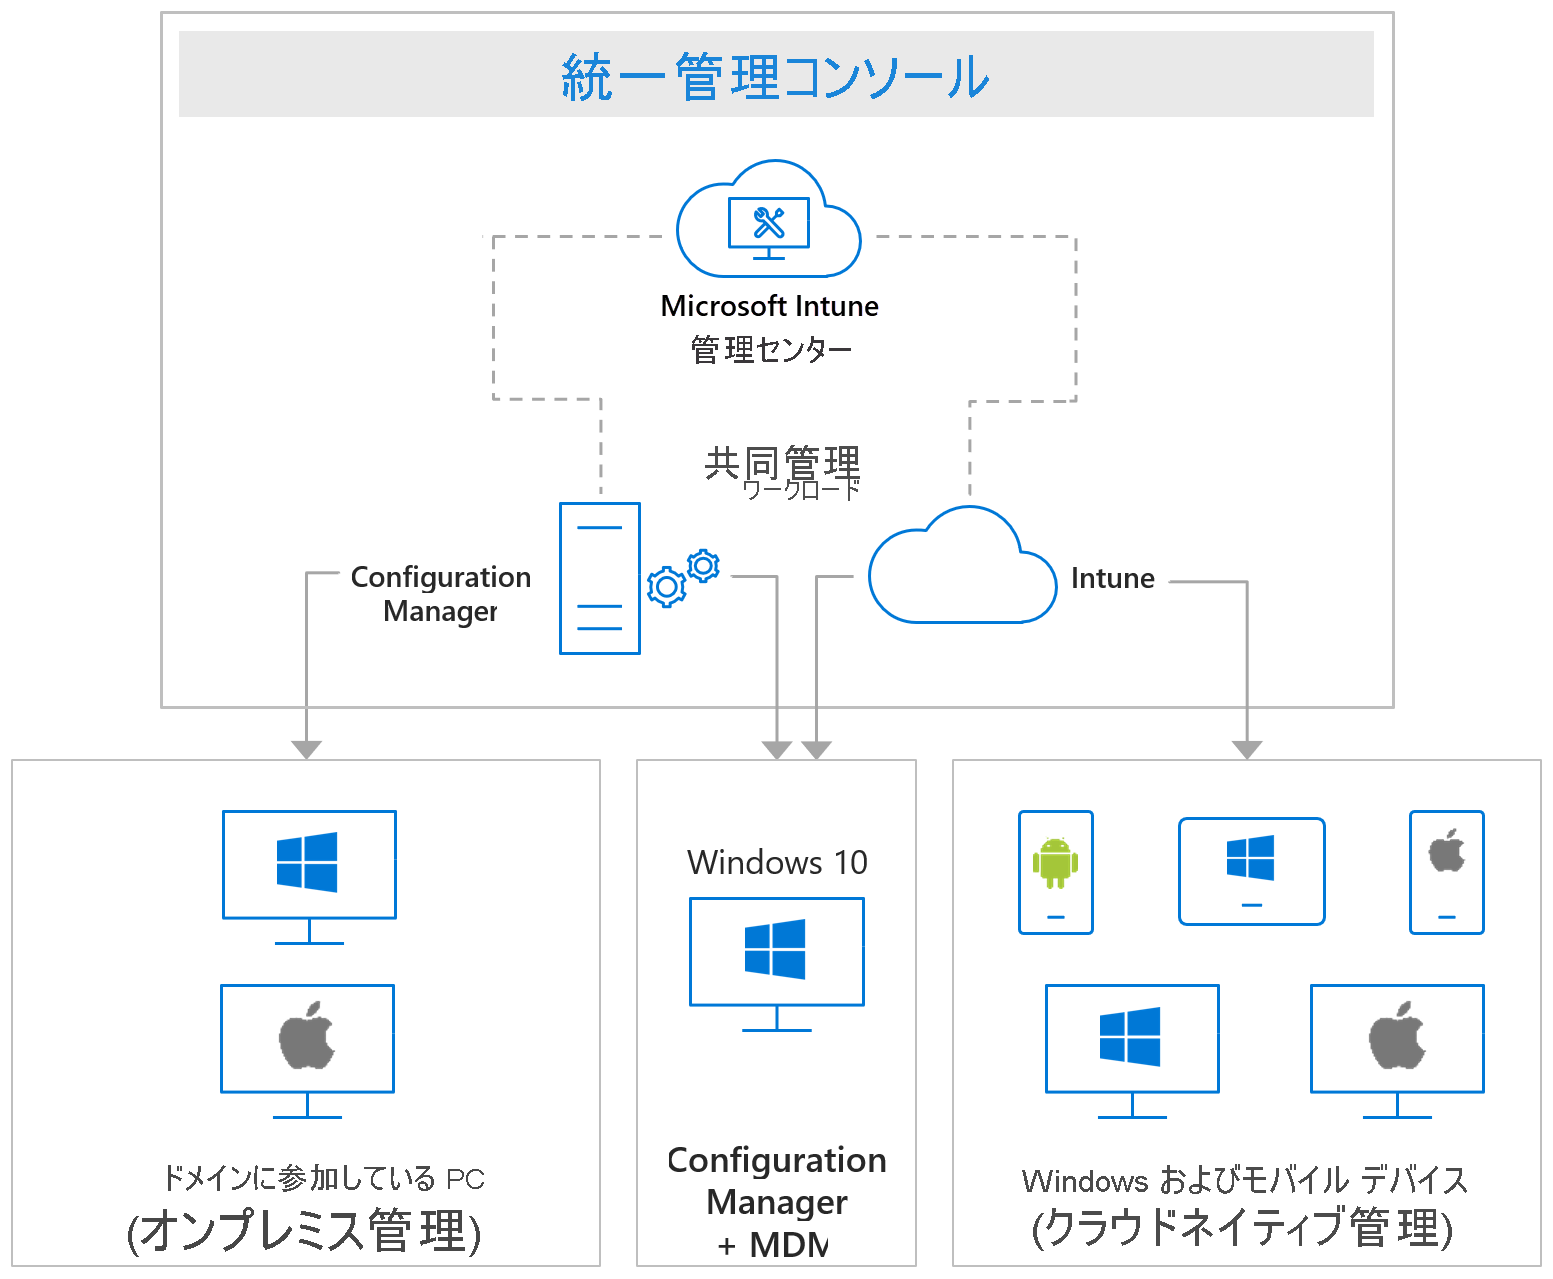 Diagram of Microsoft Intune supported platforms.